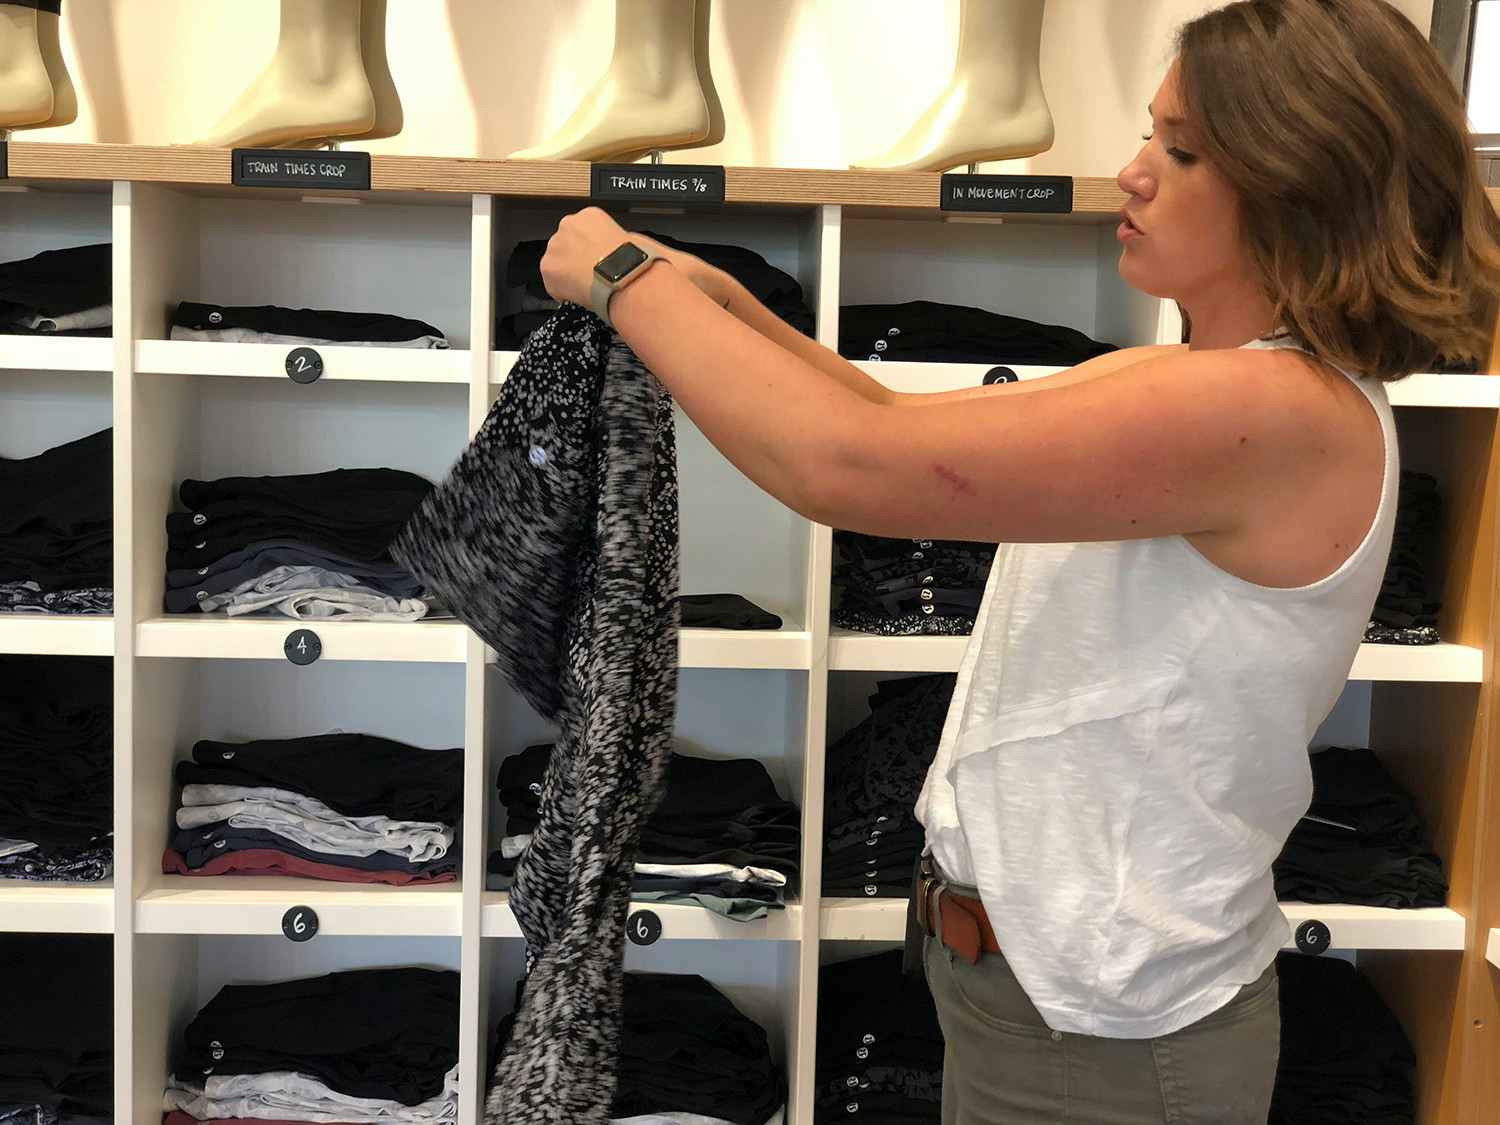 Where Can You Buy Lululemon for Cheap? - Playbite